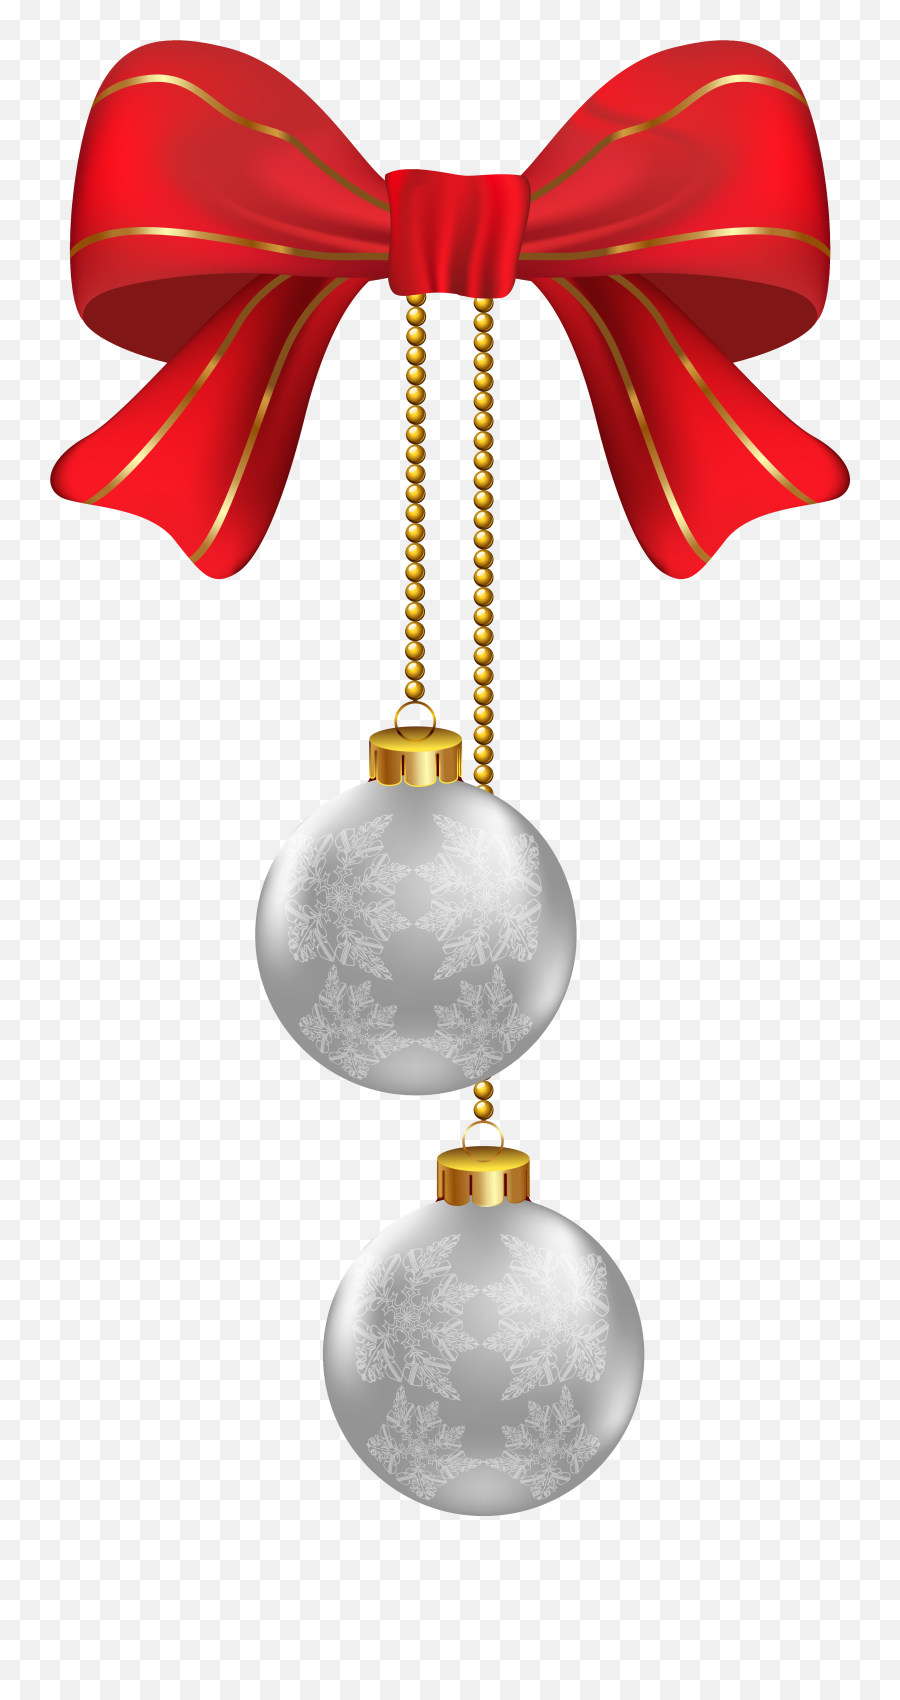 Hanging Christmas Silver Ornaments Png Clipart Image - Transparent Background Christmas Ornament Png Emoji,Emoji Christmas Ornaments